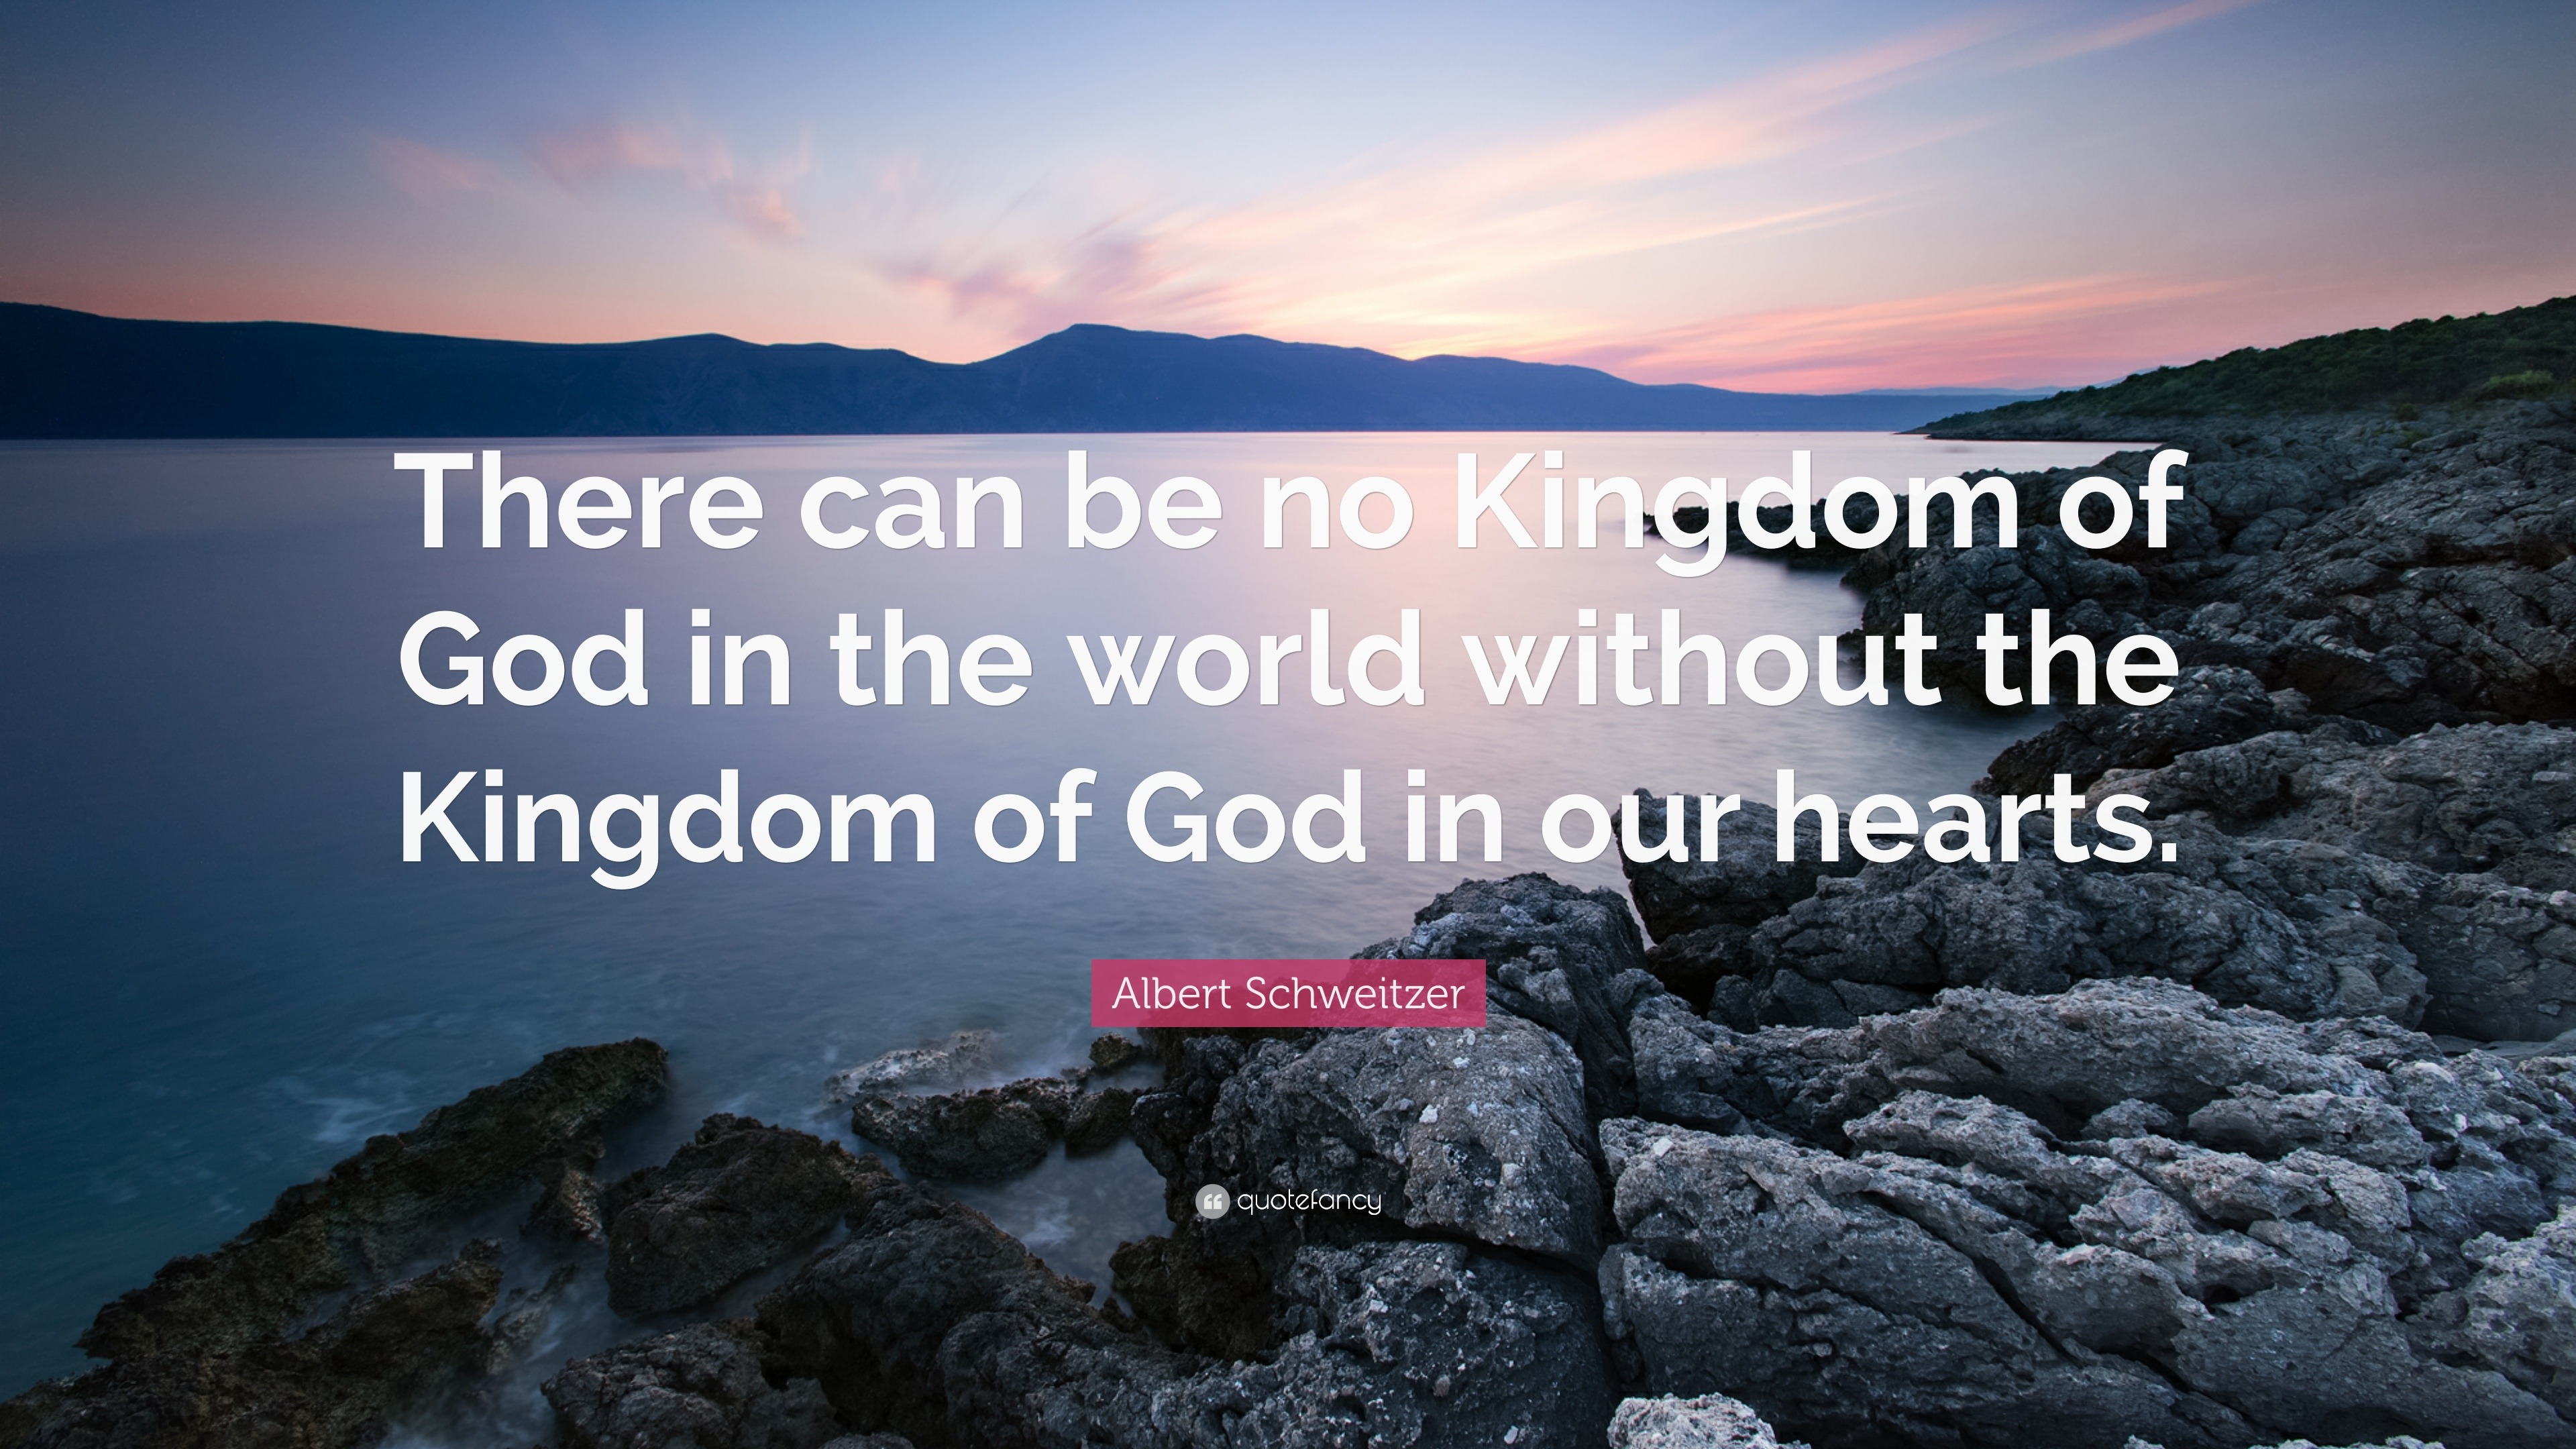 Albert Schweitzer Quote: “There can be no Kingdom of God in the world